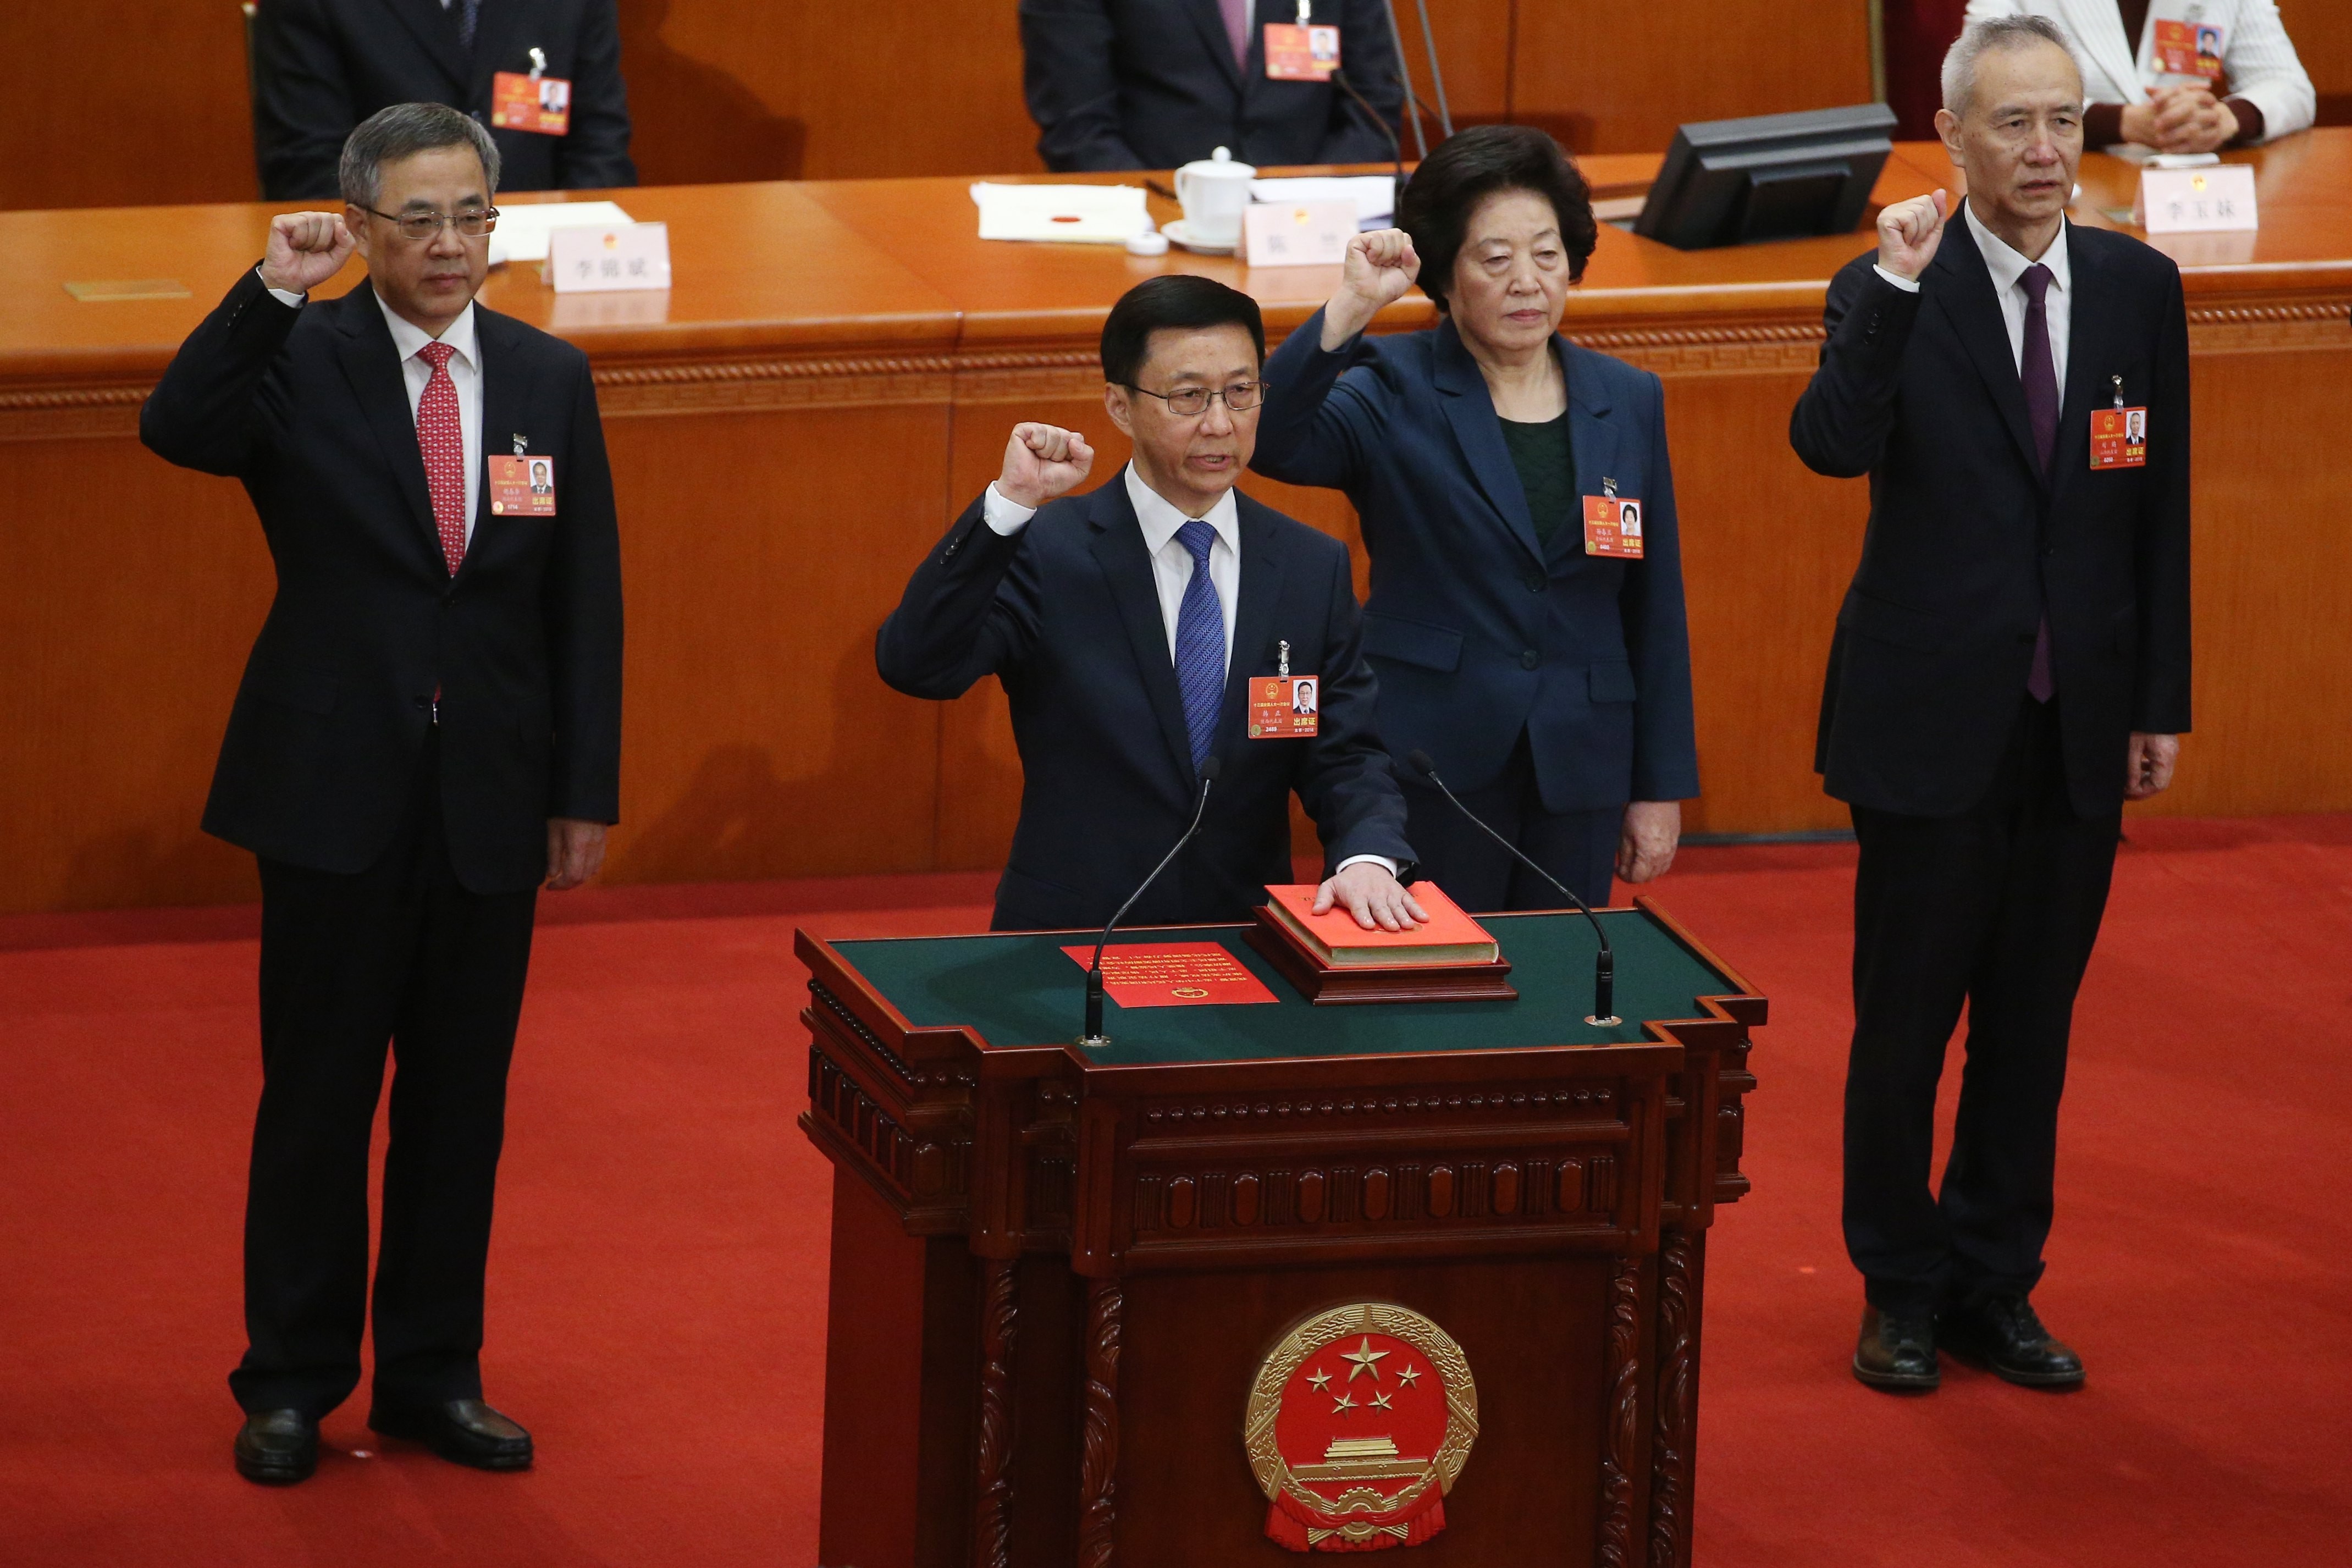 China’s four vice-premiers (from left) Hu Chunhua, Han Zheng, Sun Chunlan and Liu He swear an oath to the constitution at the National People’s Congress in Beijing on Monday. Photo: EPA-EFE